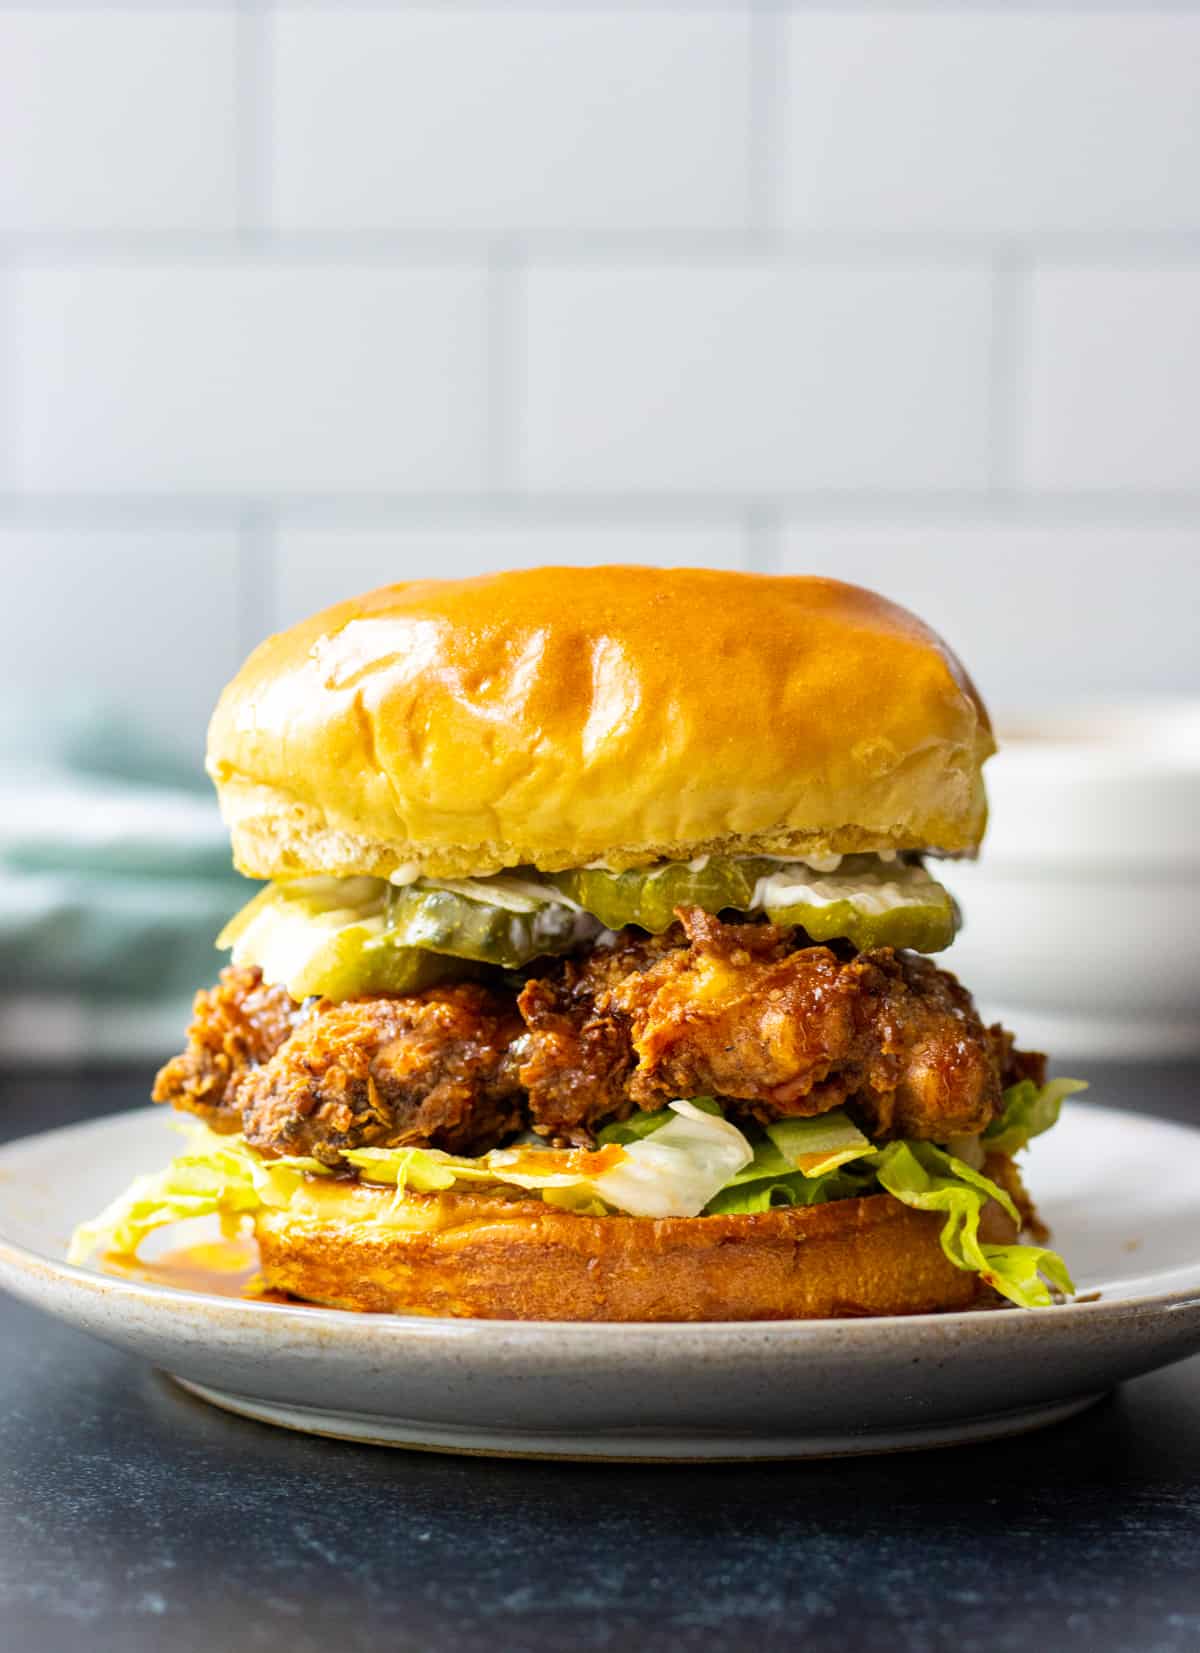 Hot honey chicken sandwich on a plate with a bowl and towel in the background.